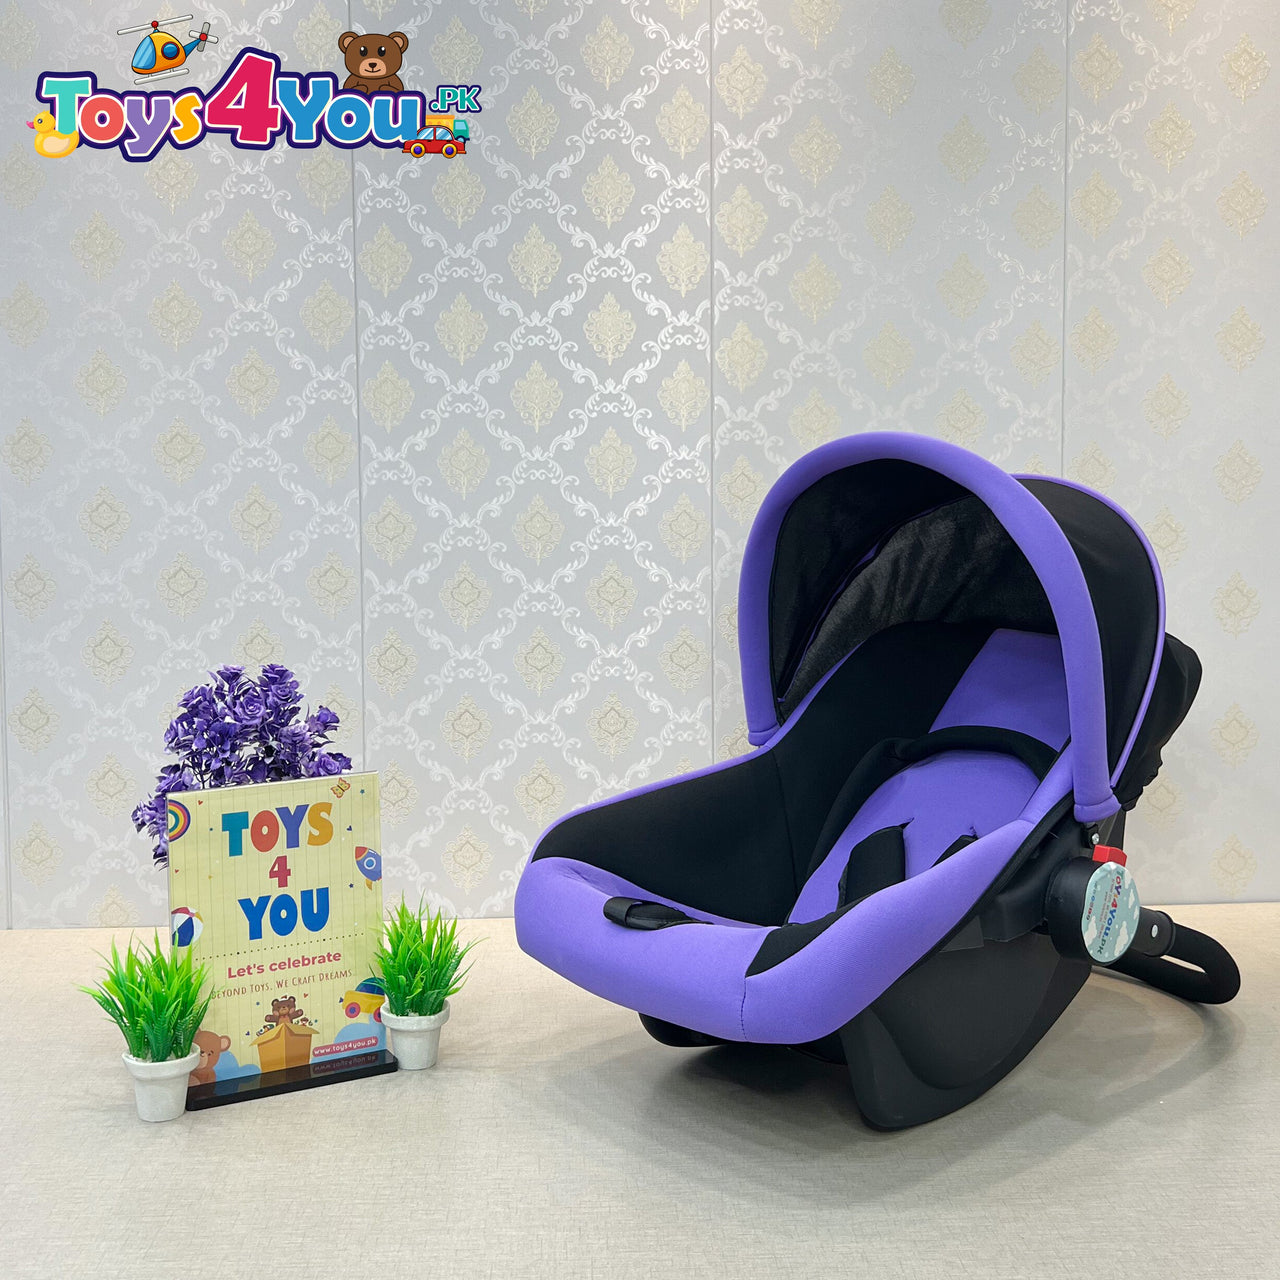 2 IN 1 BABY CARRY COT & CAR SEAT